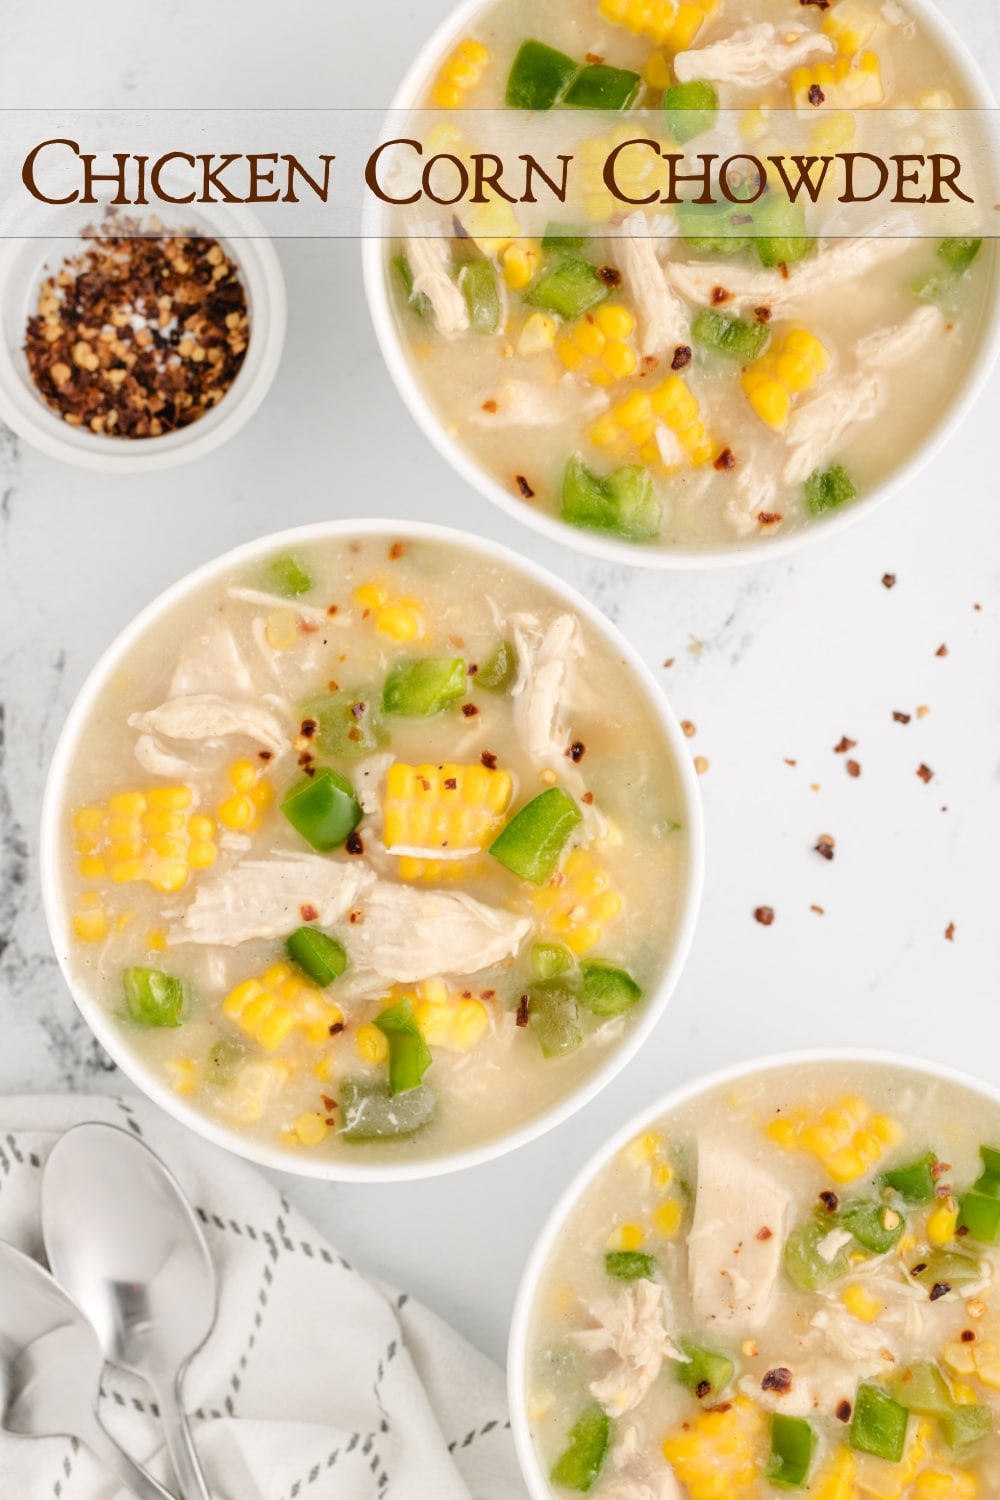 An effortless (one-pot), 30-minute chicken chowder recipe showcasing two harmonious, late summer essentials - freshly harvested sweet corn and vibrant green bell peppers. This chowder is protein-packed, satisfying and a little less decadent, which aligns perfectly with the spirit of warmer weather. It's the perfect fresh corn recipe to add to your summer dinner menu. via @cmpollak1